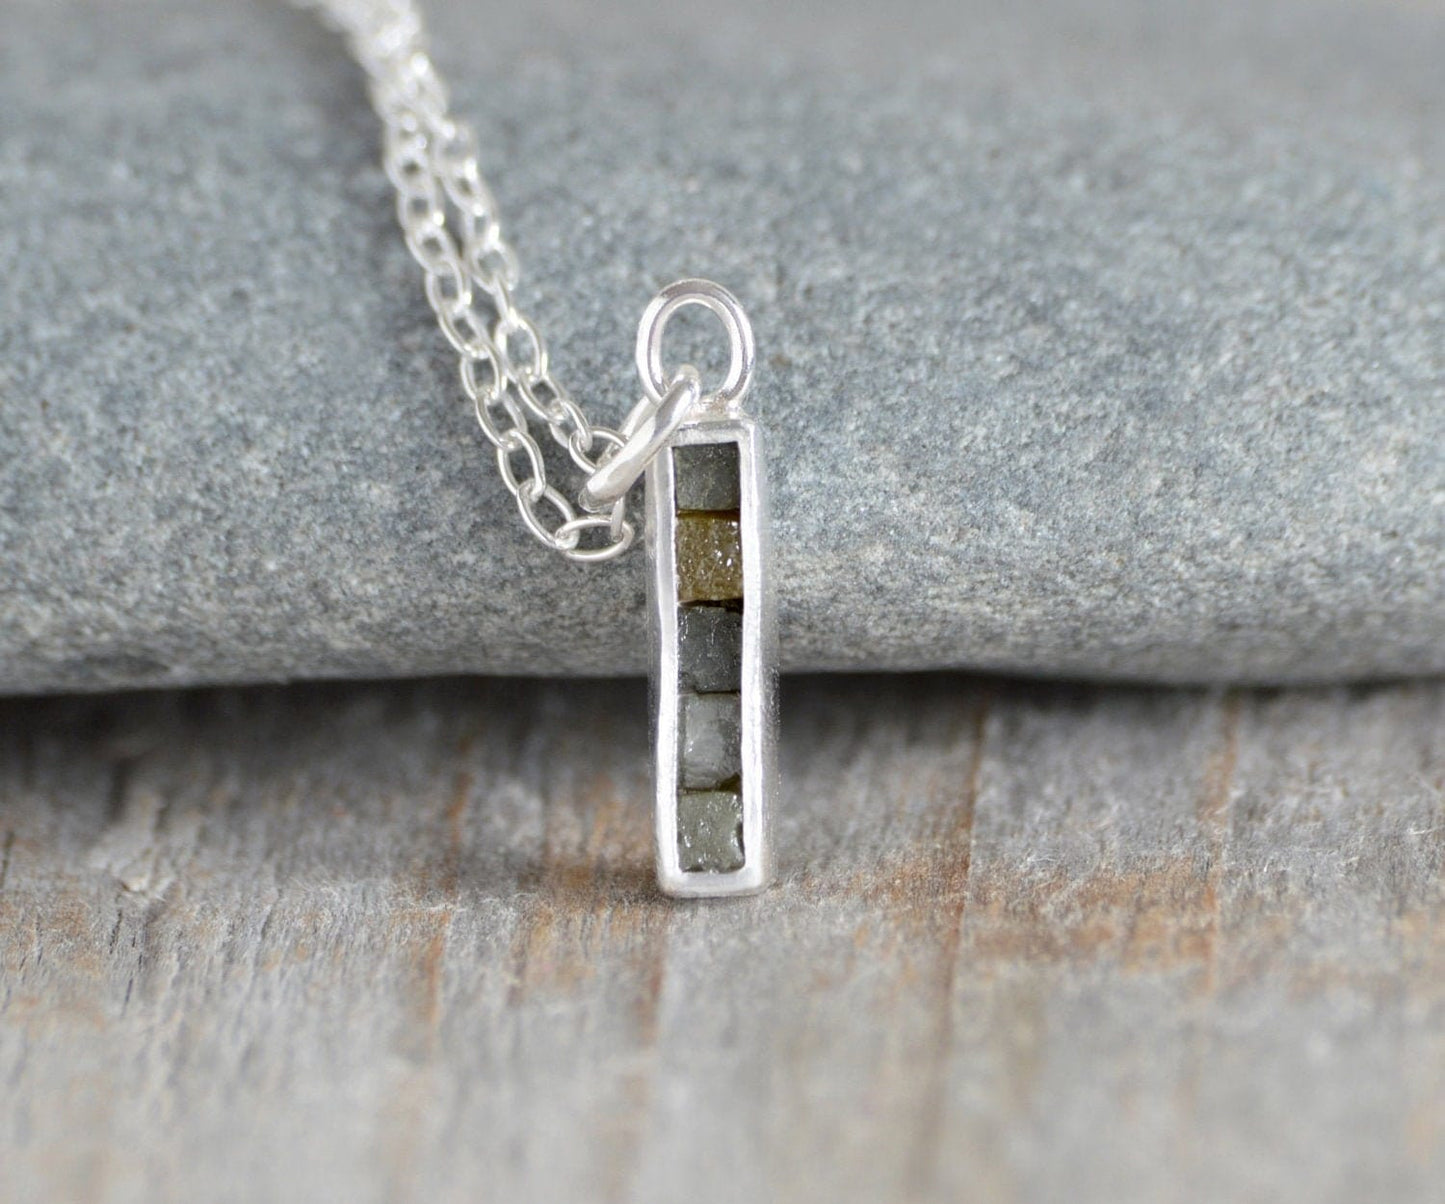 Rough Diamond Mosaic Necklace in Sterling Silver, Diamond Cubes Necklace, Mosaic Diamond Necklace